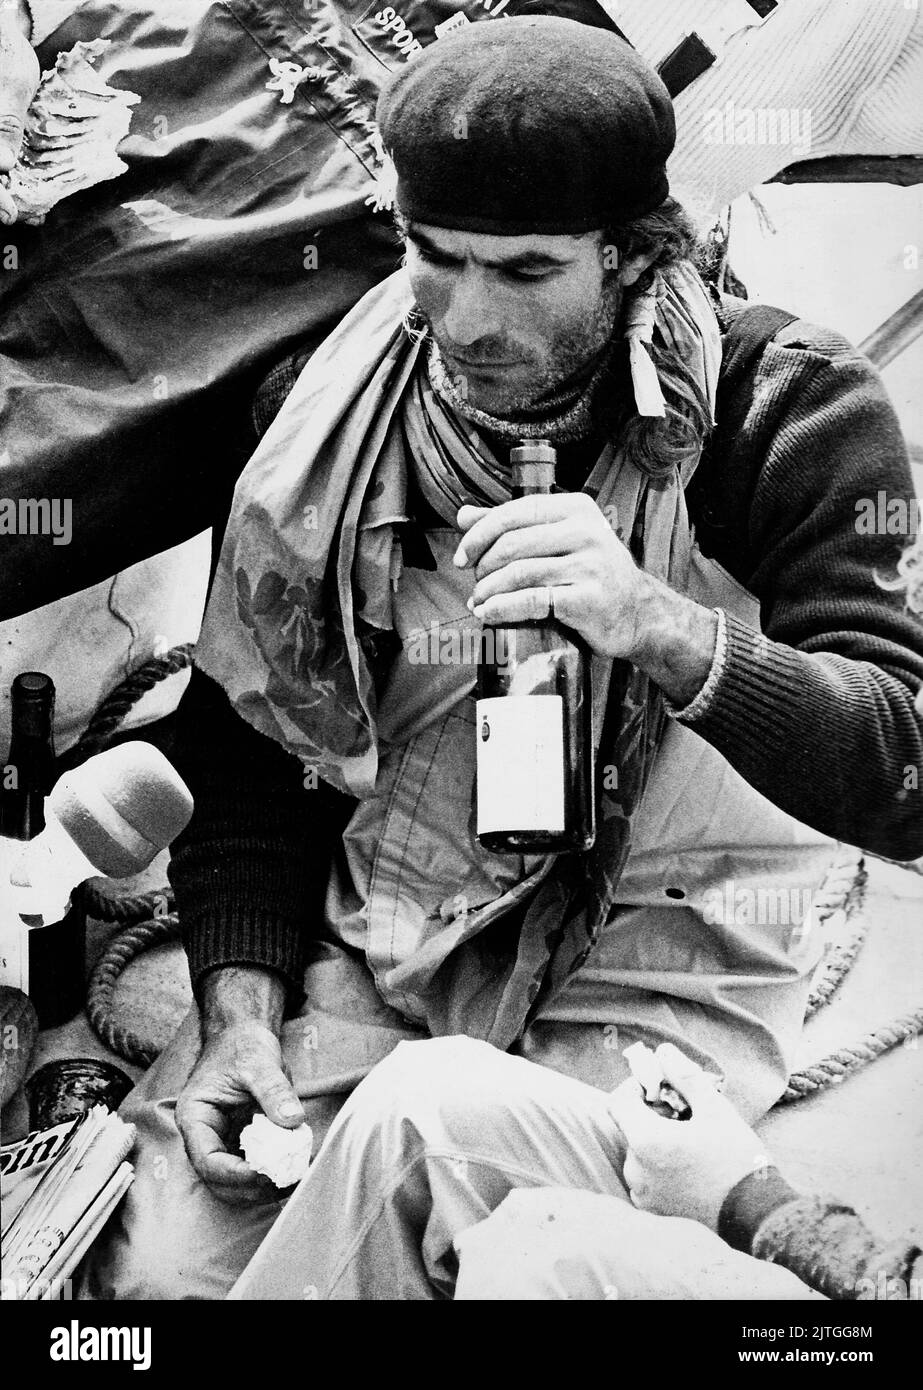 AJAXNETPHOTO. 12TH APRIL, 1974. PORTSMOUTH, ENGLAND. - MEDIA INTERVIEW - FRENCH CO-SKIPPER OF WHITBREAD ROUND THE WORLD RACE ENTRY 33 EXPORT  JEAN-PIERRE MILLET PICTURED ENJOYING BREAD AND WINE DURING INTERVIEW WITH FRENCH MEDIA ON SAFE ARRIVAL AT HMS VERNON AT END OF LAST LEG OF RACE. MILLET'S CO-SKIPPER DOMINIQUE GUILLET WAS LOST OVERBOARD FROM THE YACHT ON 23RD NOVEMBER, 1973 AFTER YACHT WAS OVERTURNED BY ROGUE WAVE IN ROARING FORTIES N.E. OF KERGUELEN ISLANDS.PHOTO:JONATHAN EASTLAND/AJAX REF:340 220105 30 Stock Photo